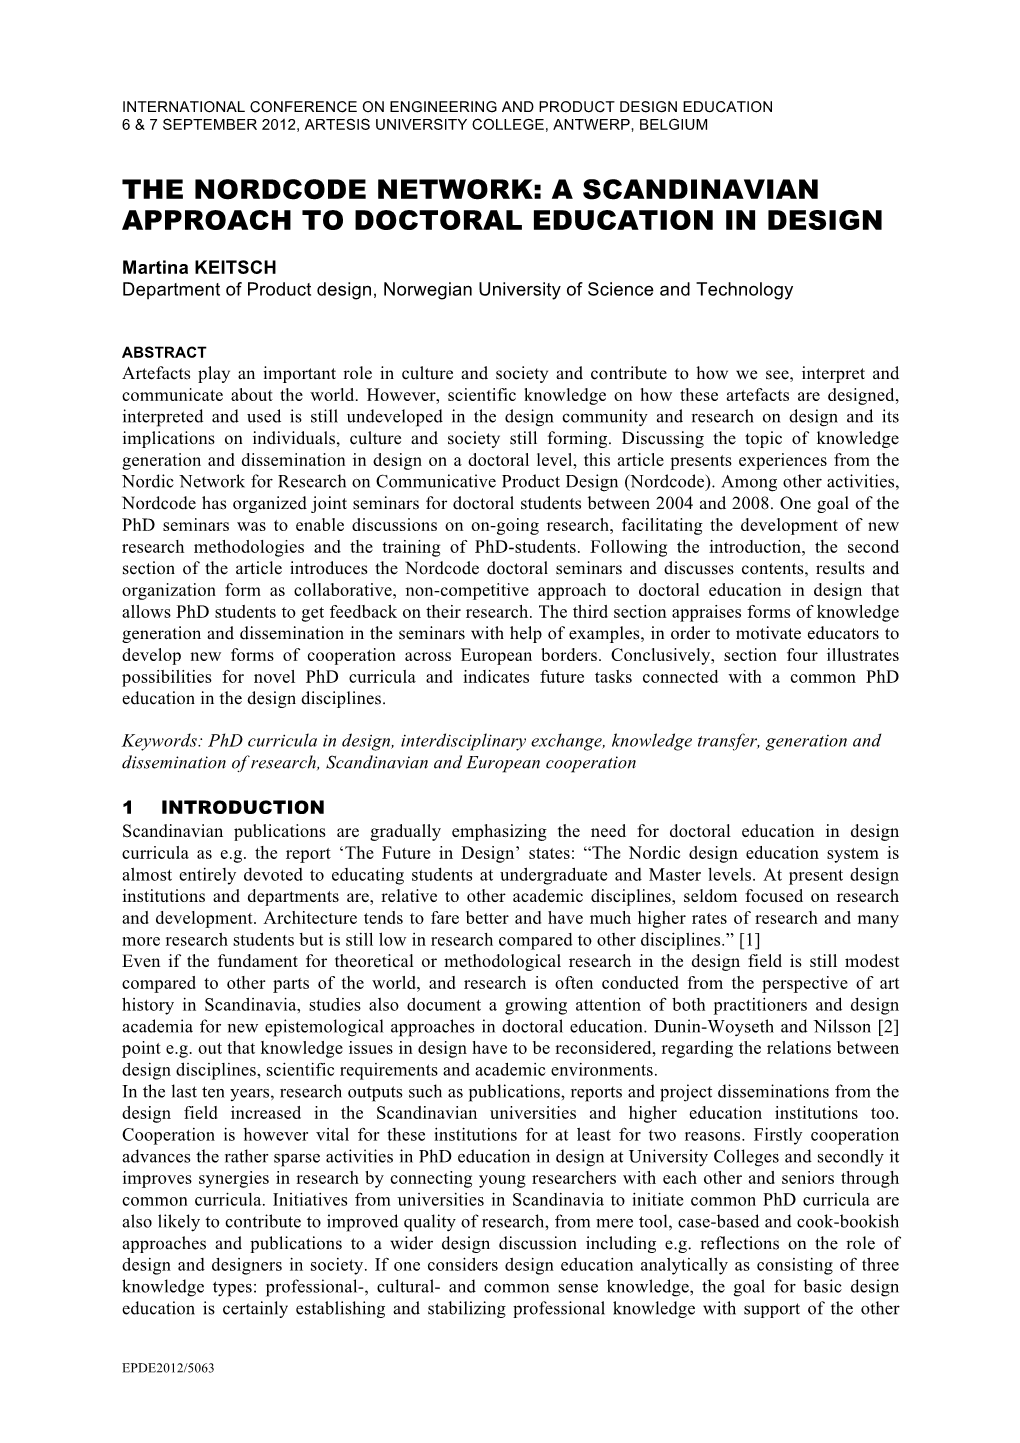 The Nordcode Network: a Scandinavian Approach to Doctoral Education in Design